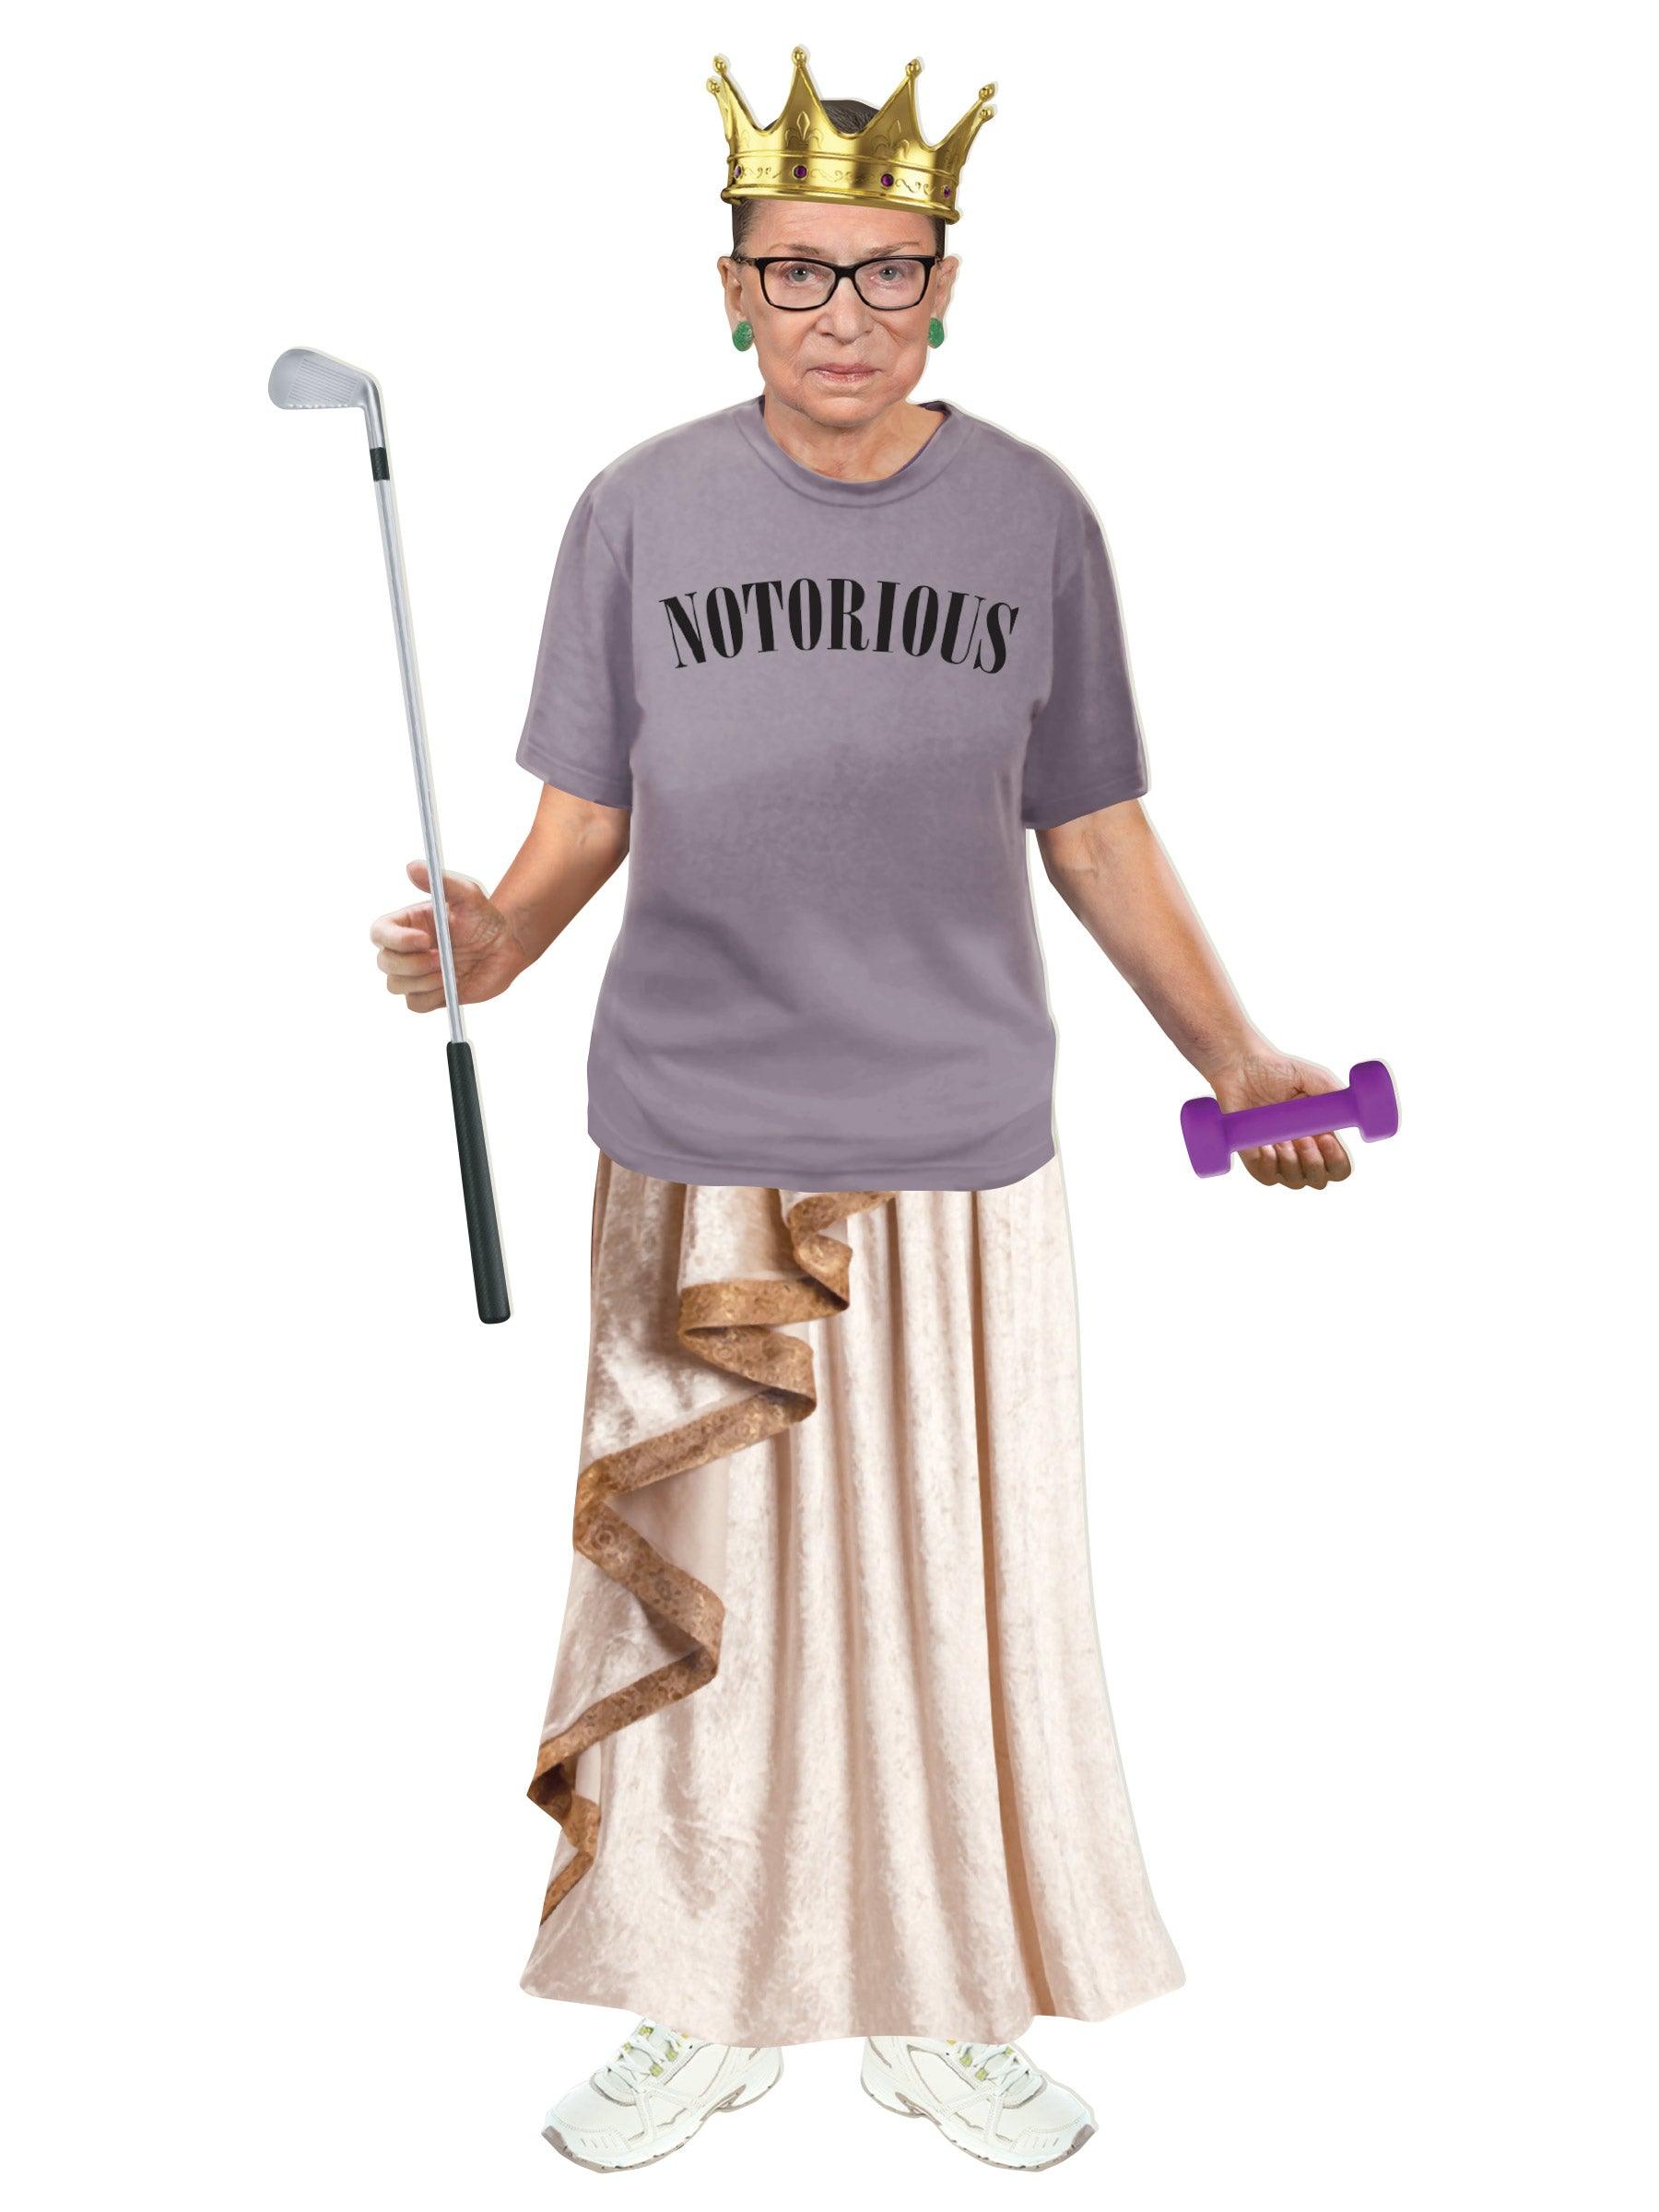 Product photo of Ruth Bader Ginsburg Magnetic Dress Up, a novelty gift manufactured by The Unemployed Philosophers Guild.